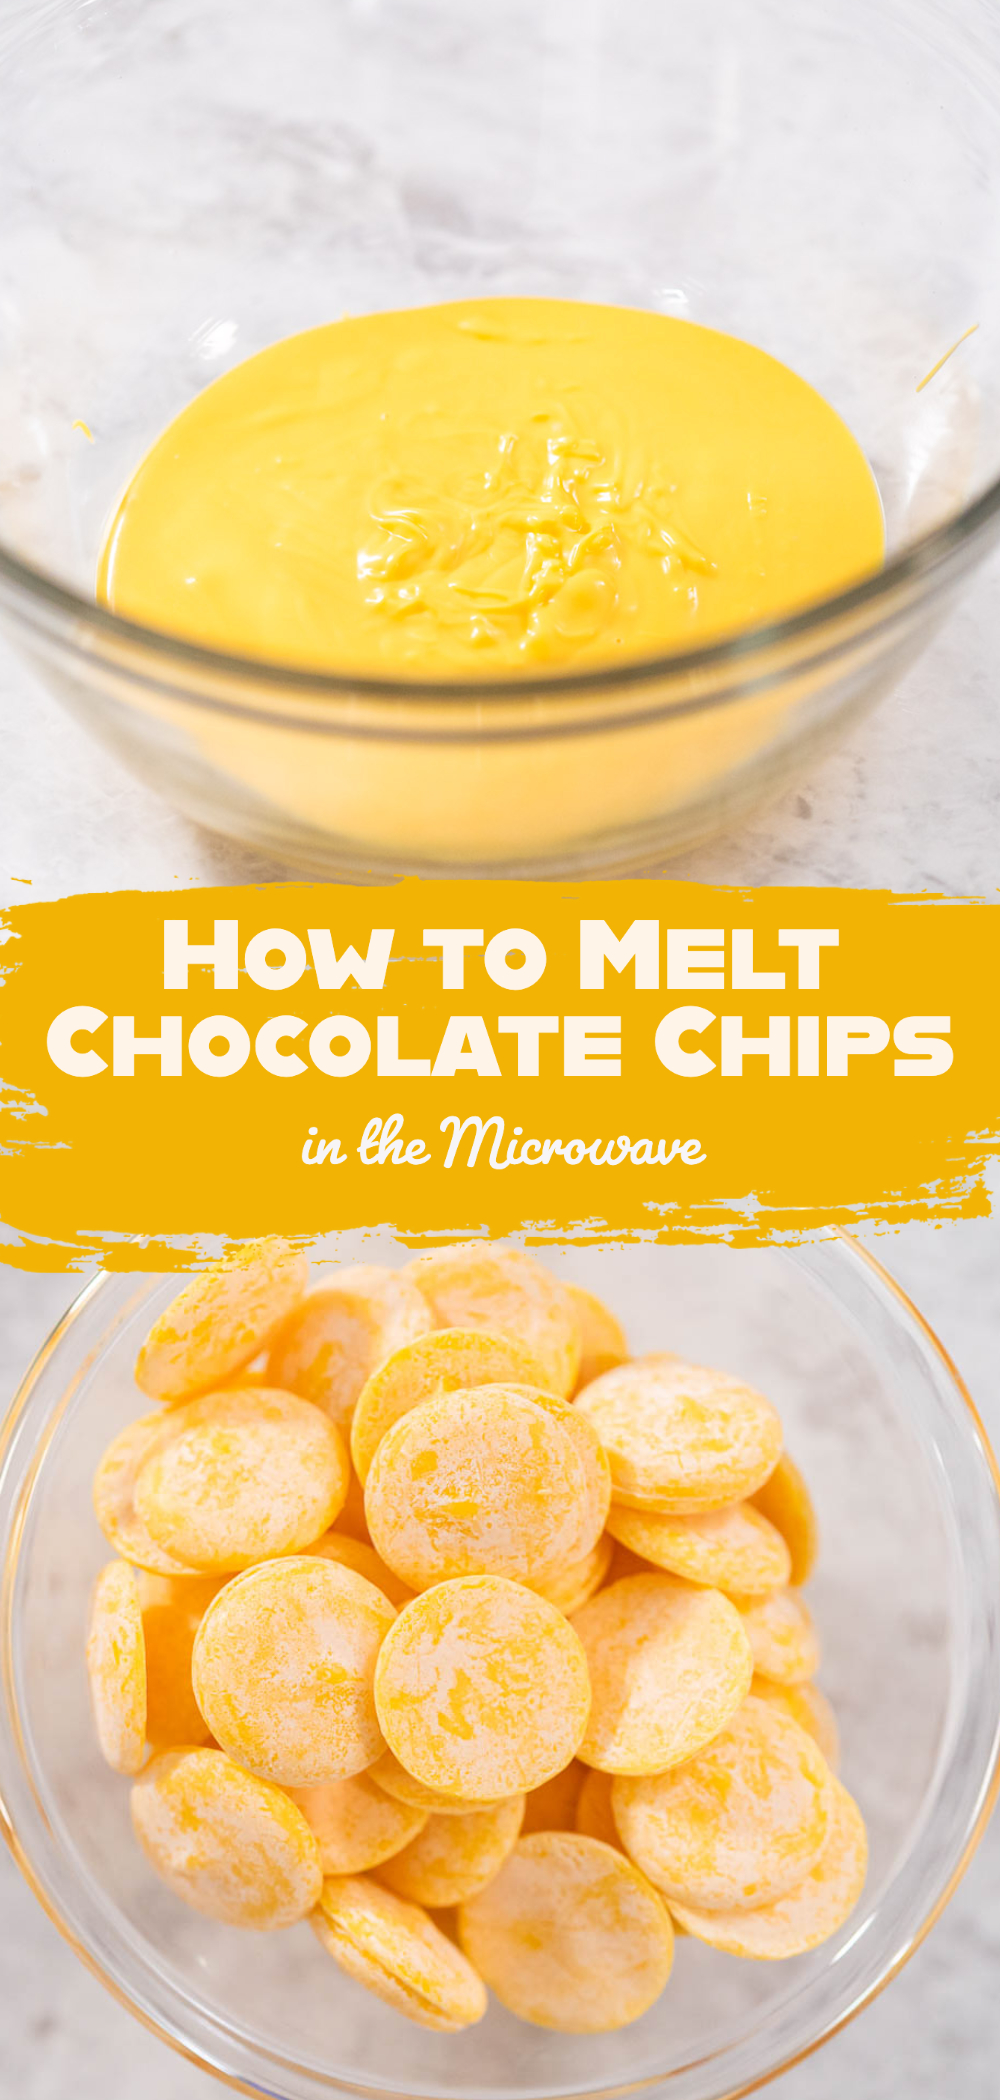 How to Melt Chocolate Chips in the Microwave